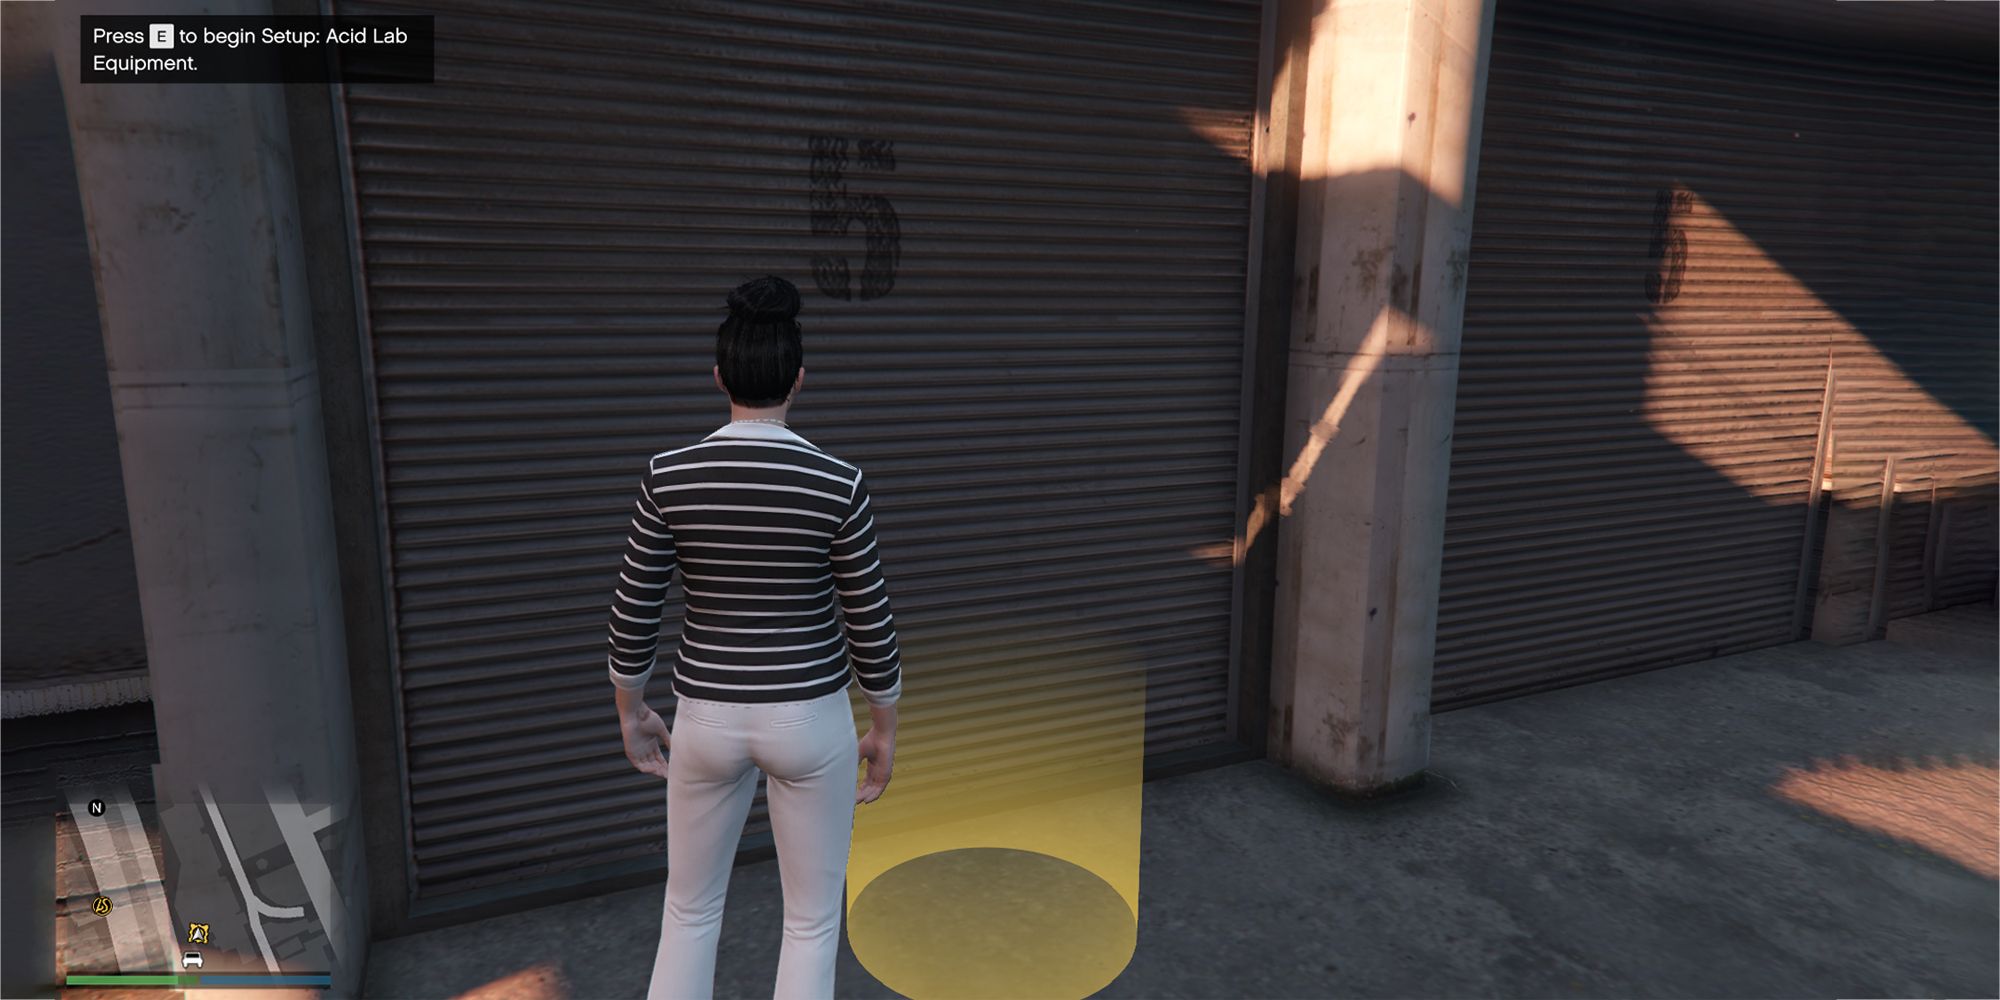 The image shows a Grand Theft Auto Online player standing outside a warehouse next to a circular yellow marker on the ground.  The text in the upper left reads 'Press E to begin setting up the acid lab equipment'.